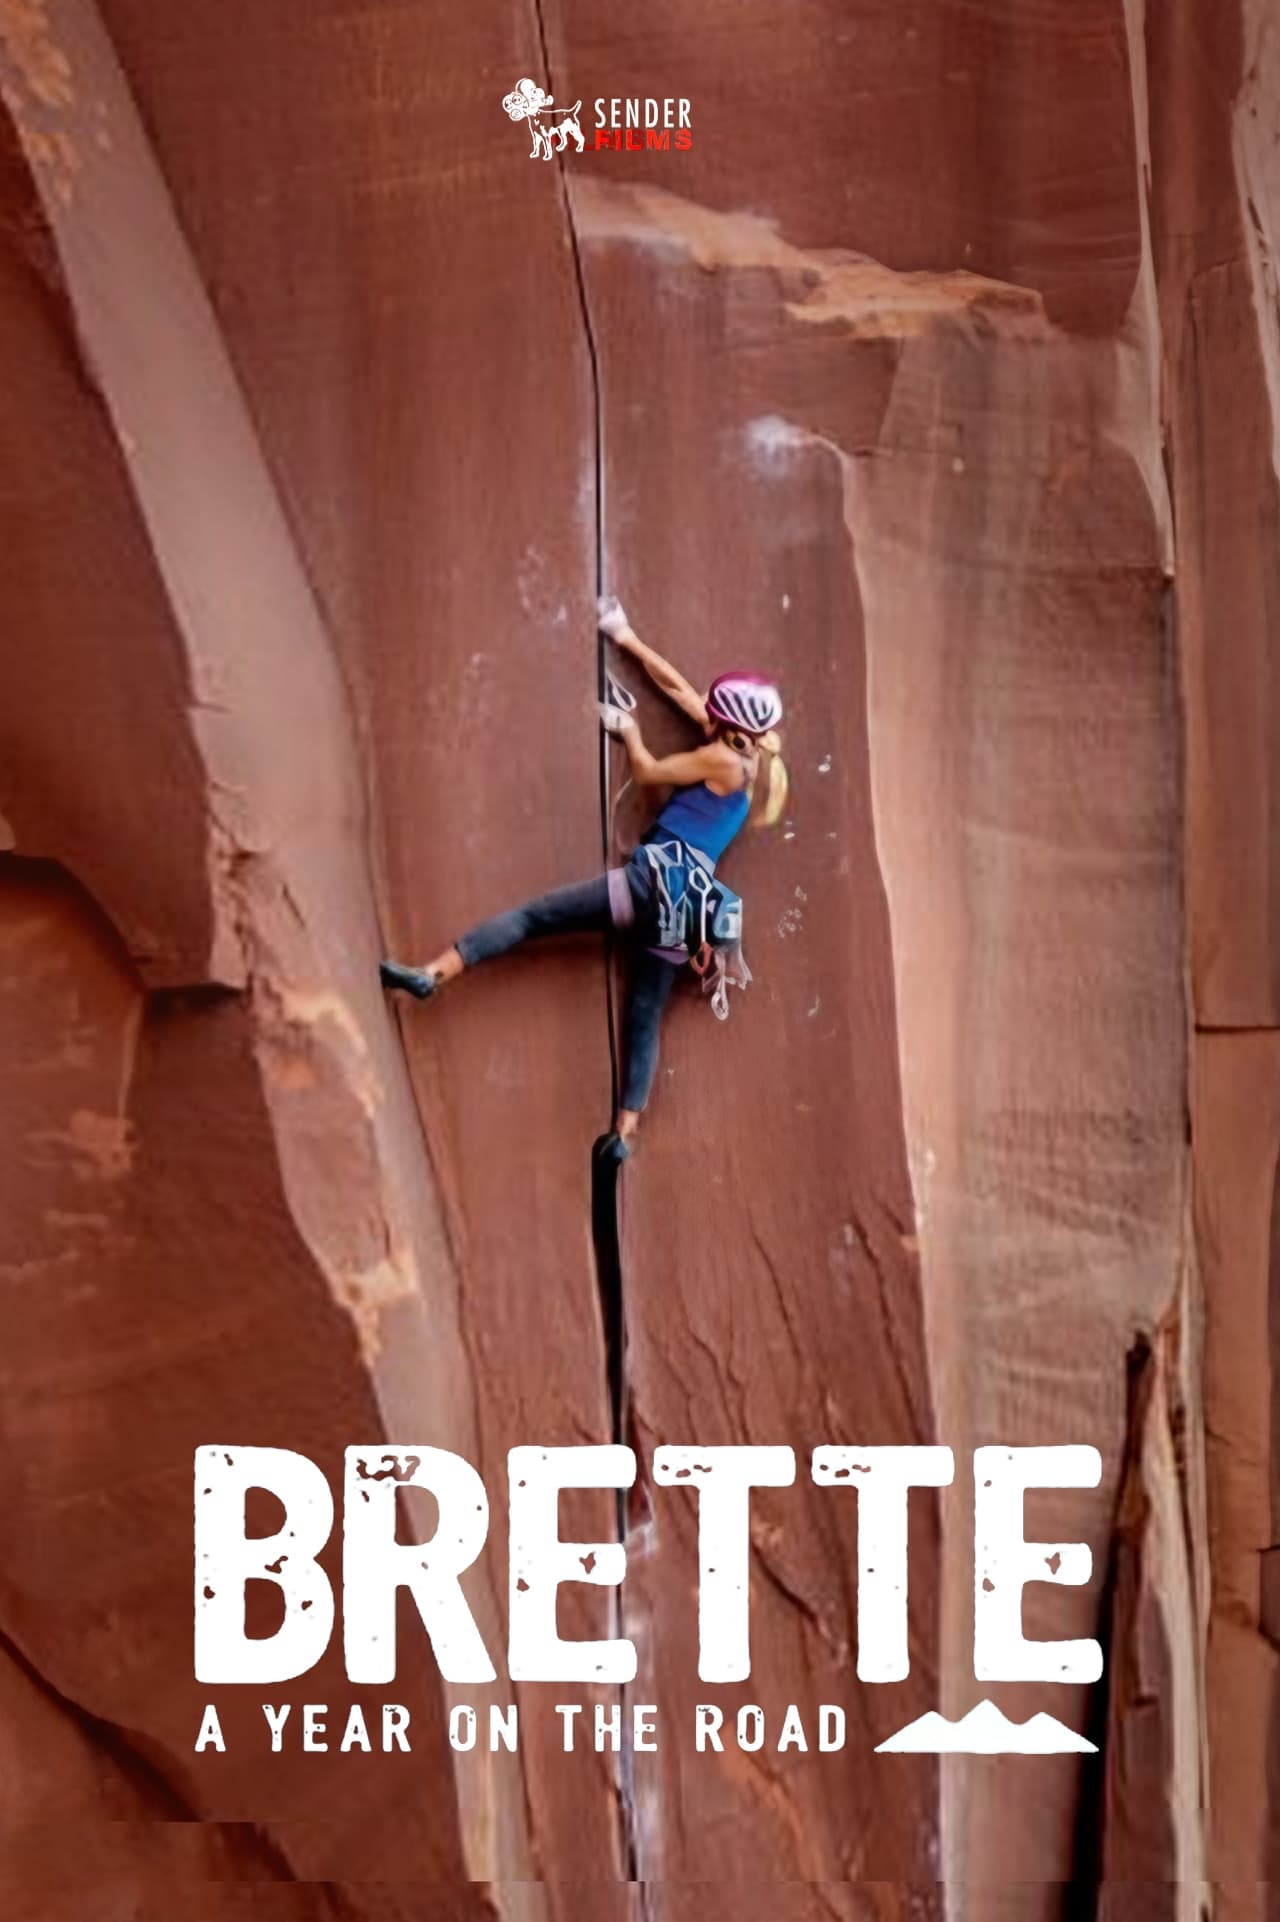 Brette, A Year On The Road